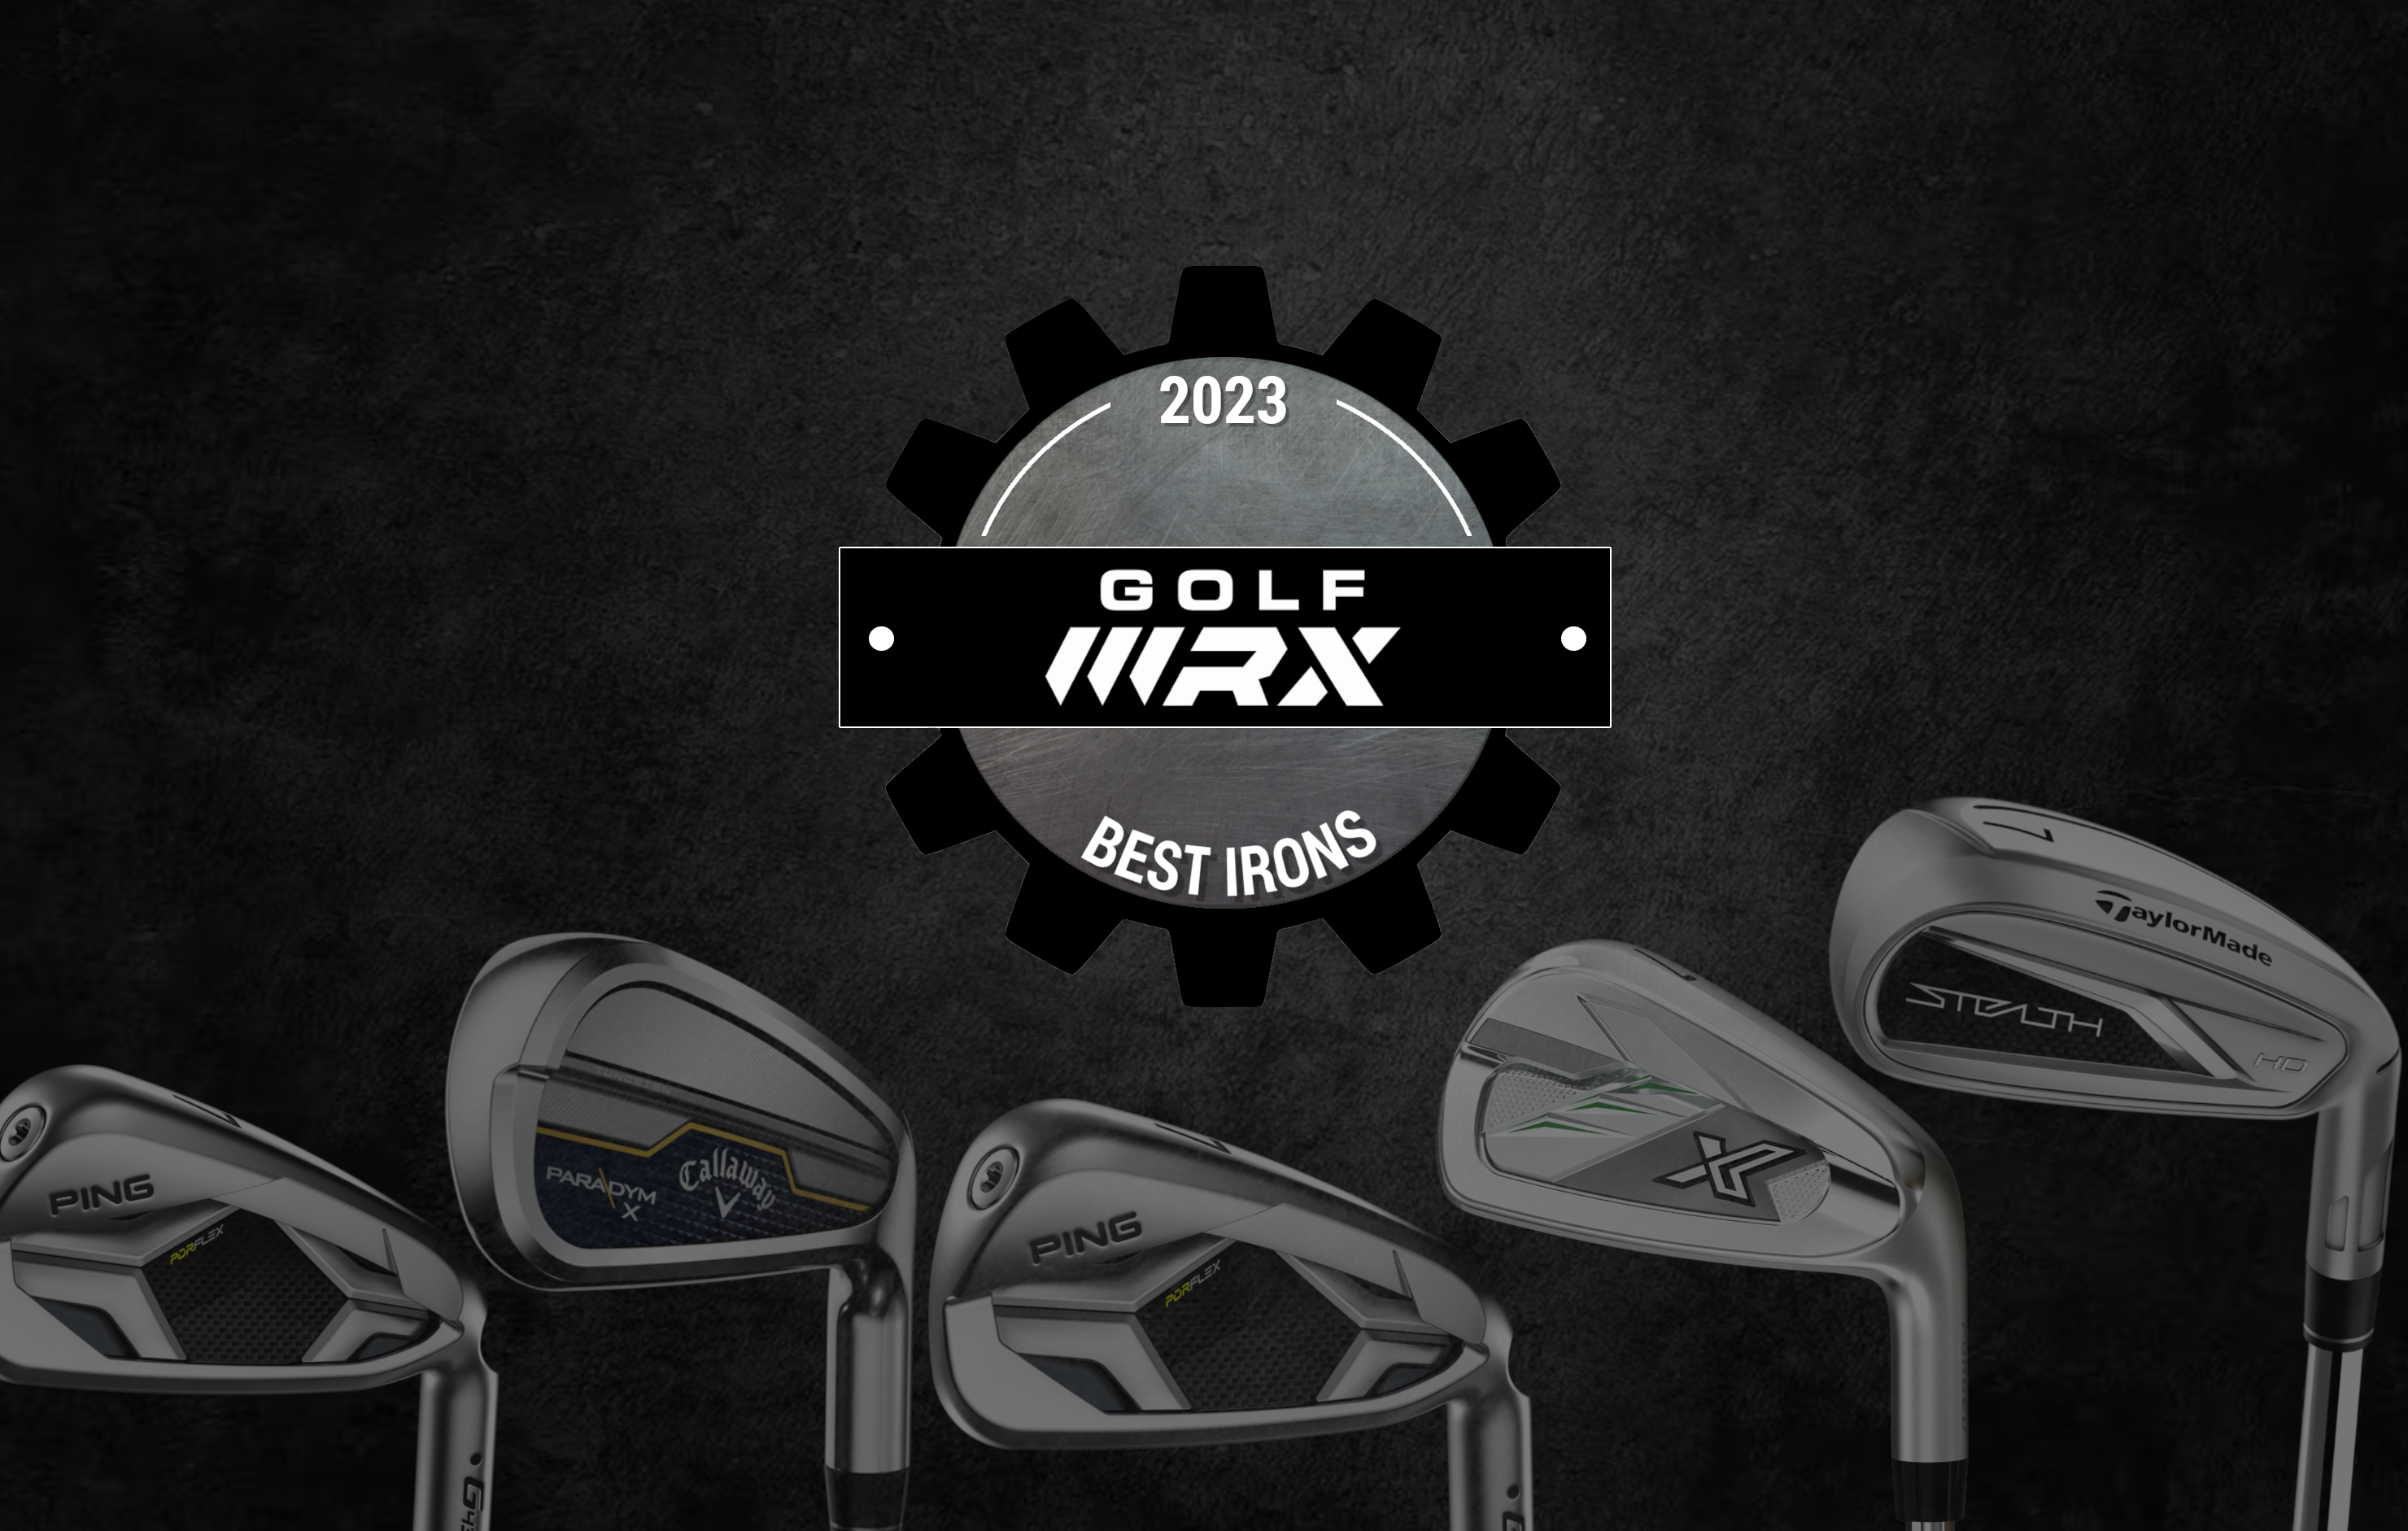 https://www.golfwrx.com/wp-content/uploads/2023/04/2023-BEST-IRONS_FEATURED-IMAGE.png